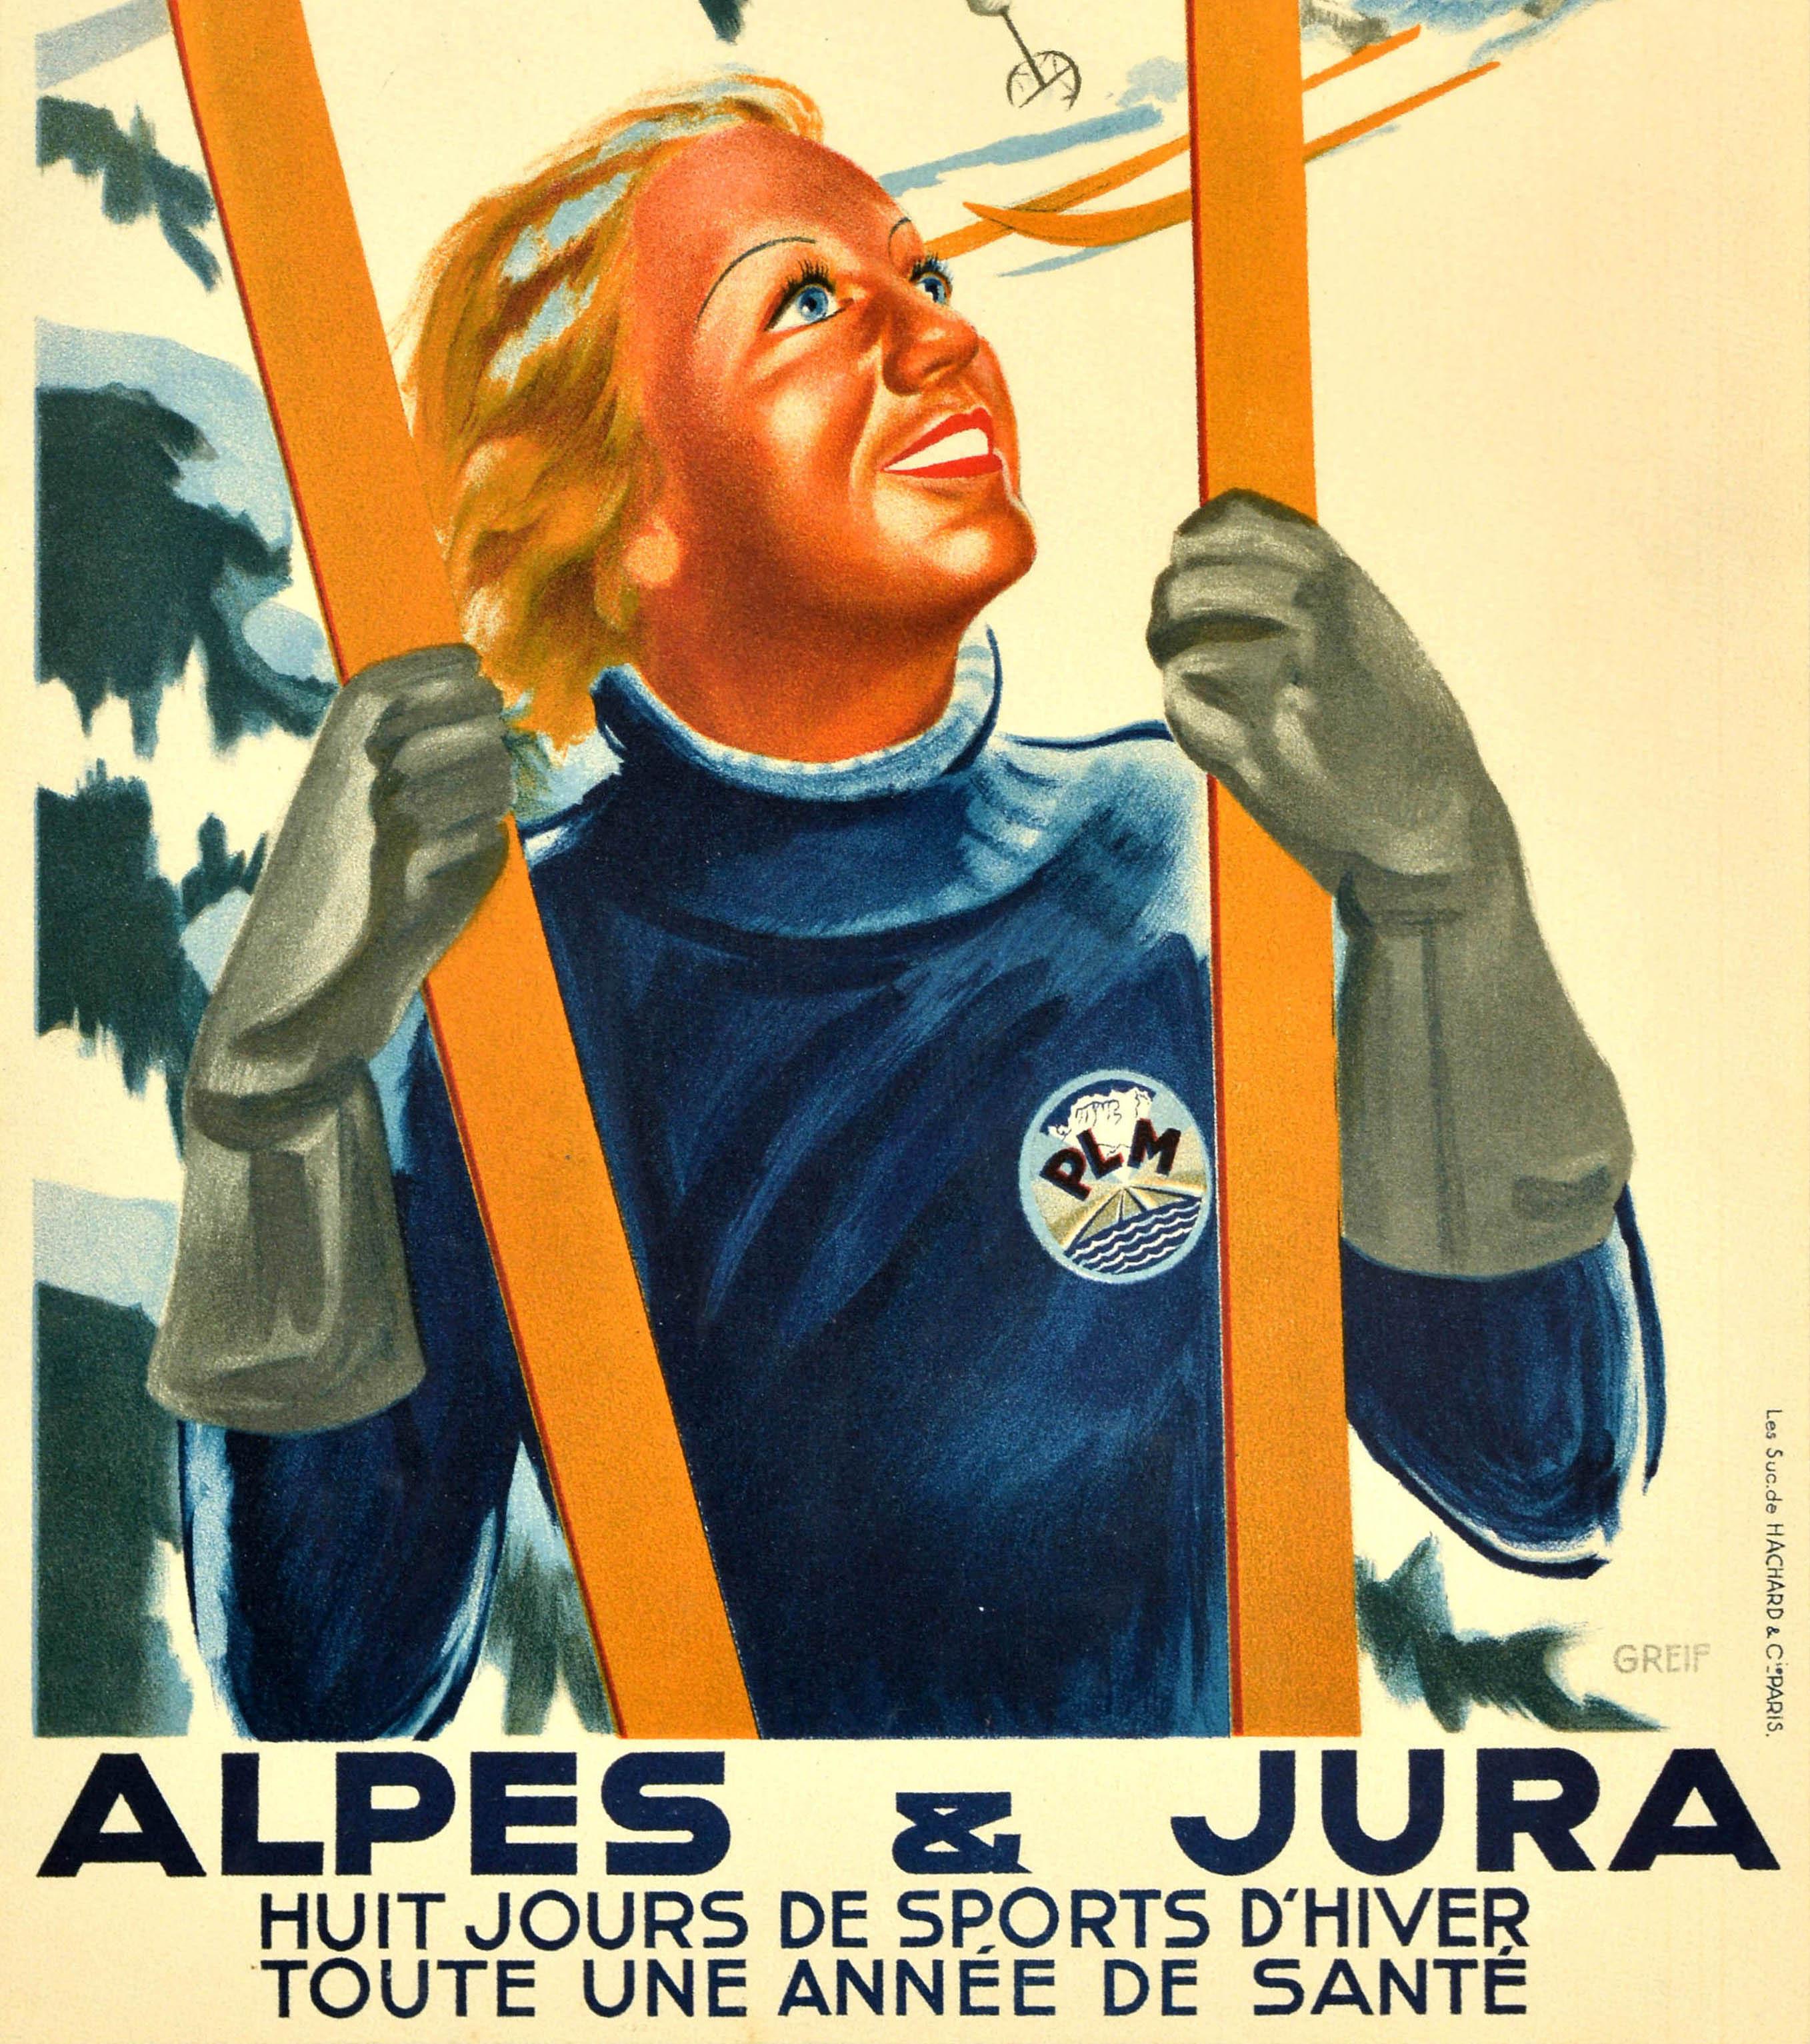 Original vintage winter sport and skiing travel poster - Alpes & Jura Eight days of winter sports A whole year of health / Huit jours de sports d'hiver Toute une annee de sante - featuring artwork depicting a smiling lady in front of a snow topped